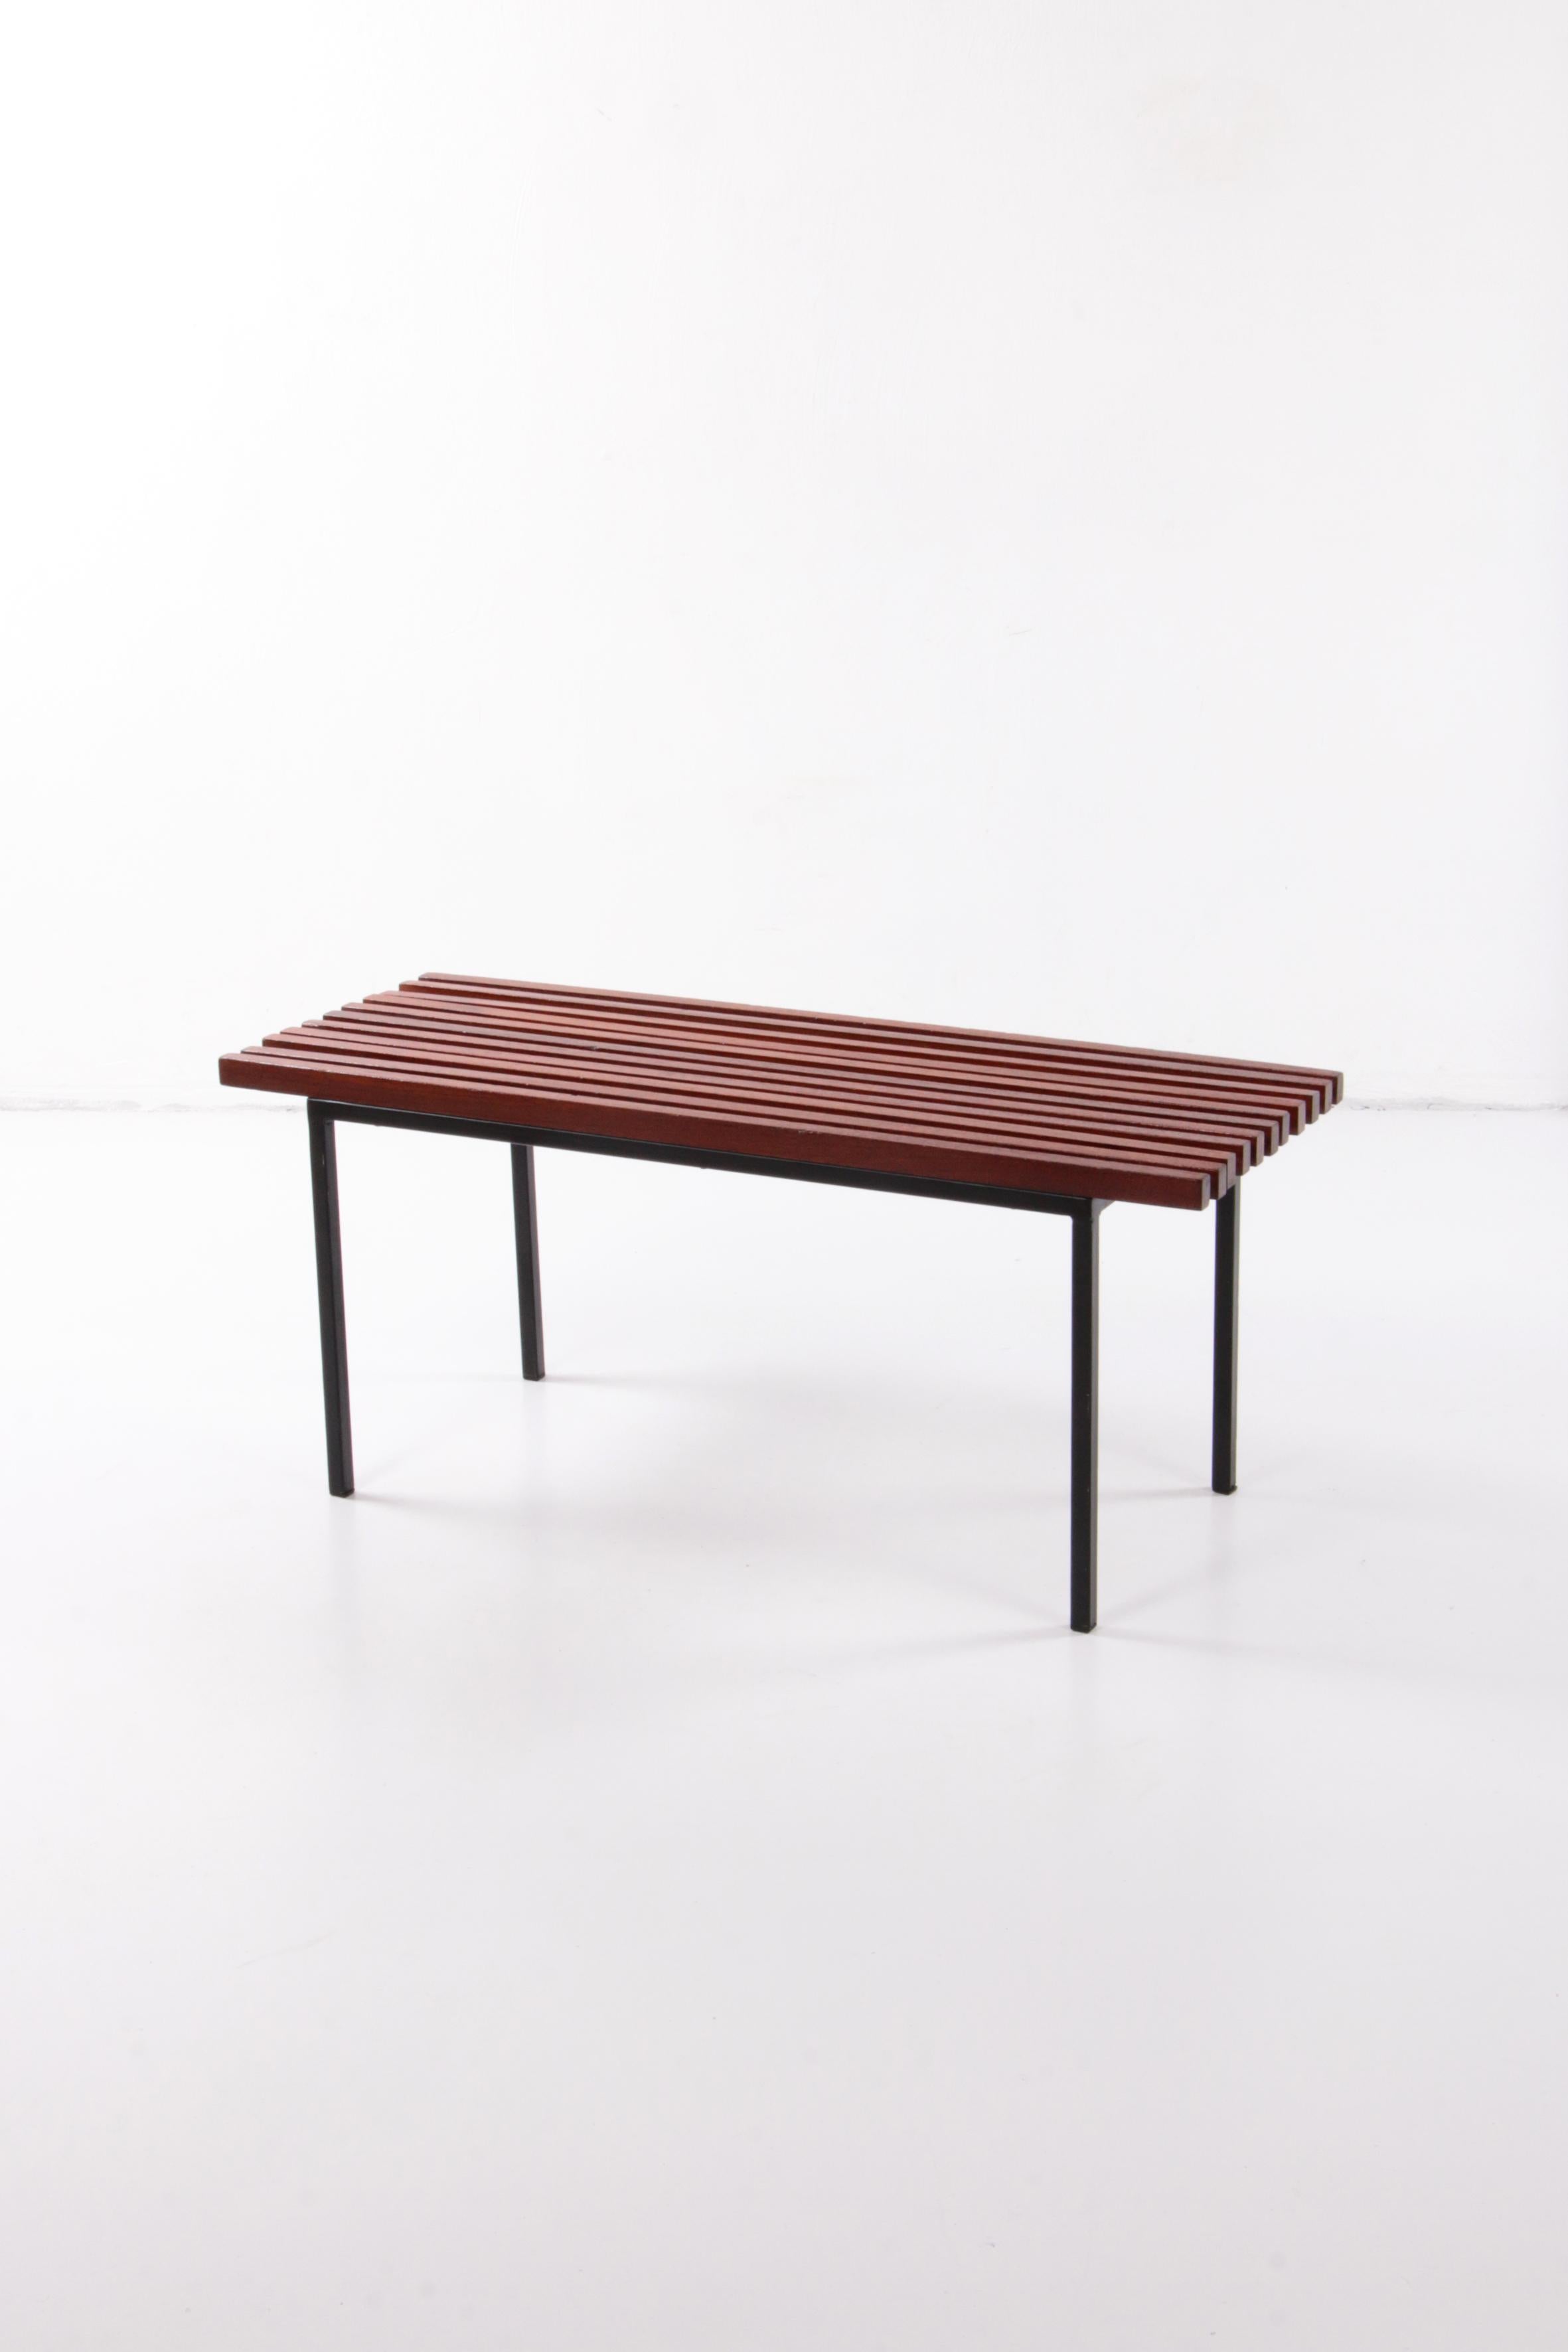 Vintage wooden bench in the style of Charlotte Perriand, 1960s.

This is a beautiful metal and wooden bench from France around the 1960s. It has a beautiful black base with a wooden slatted seat.

Very nice under your coat rack to place your